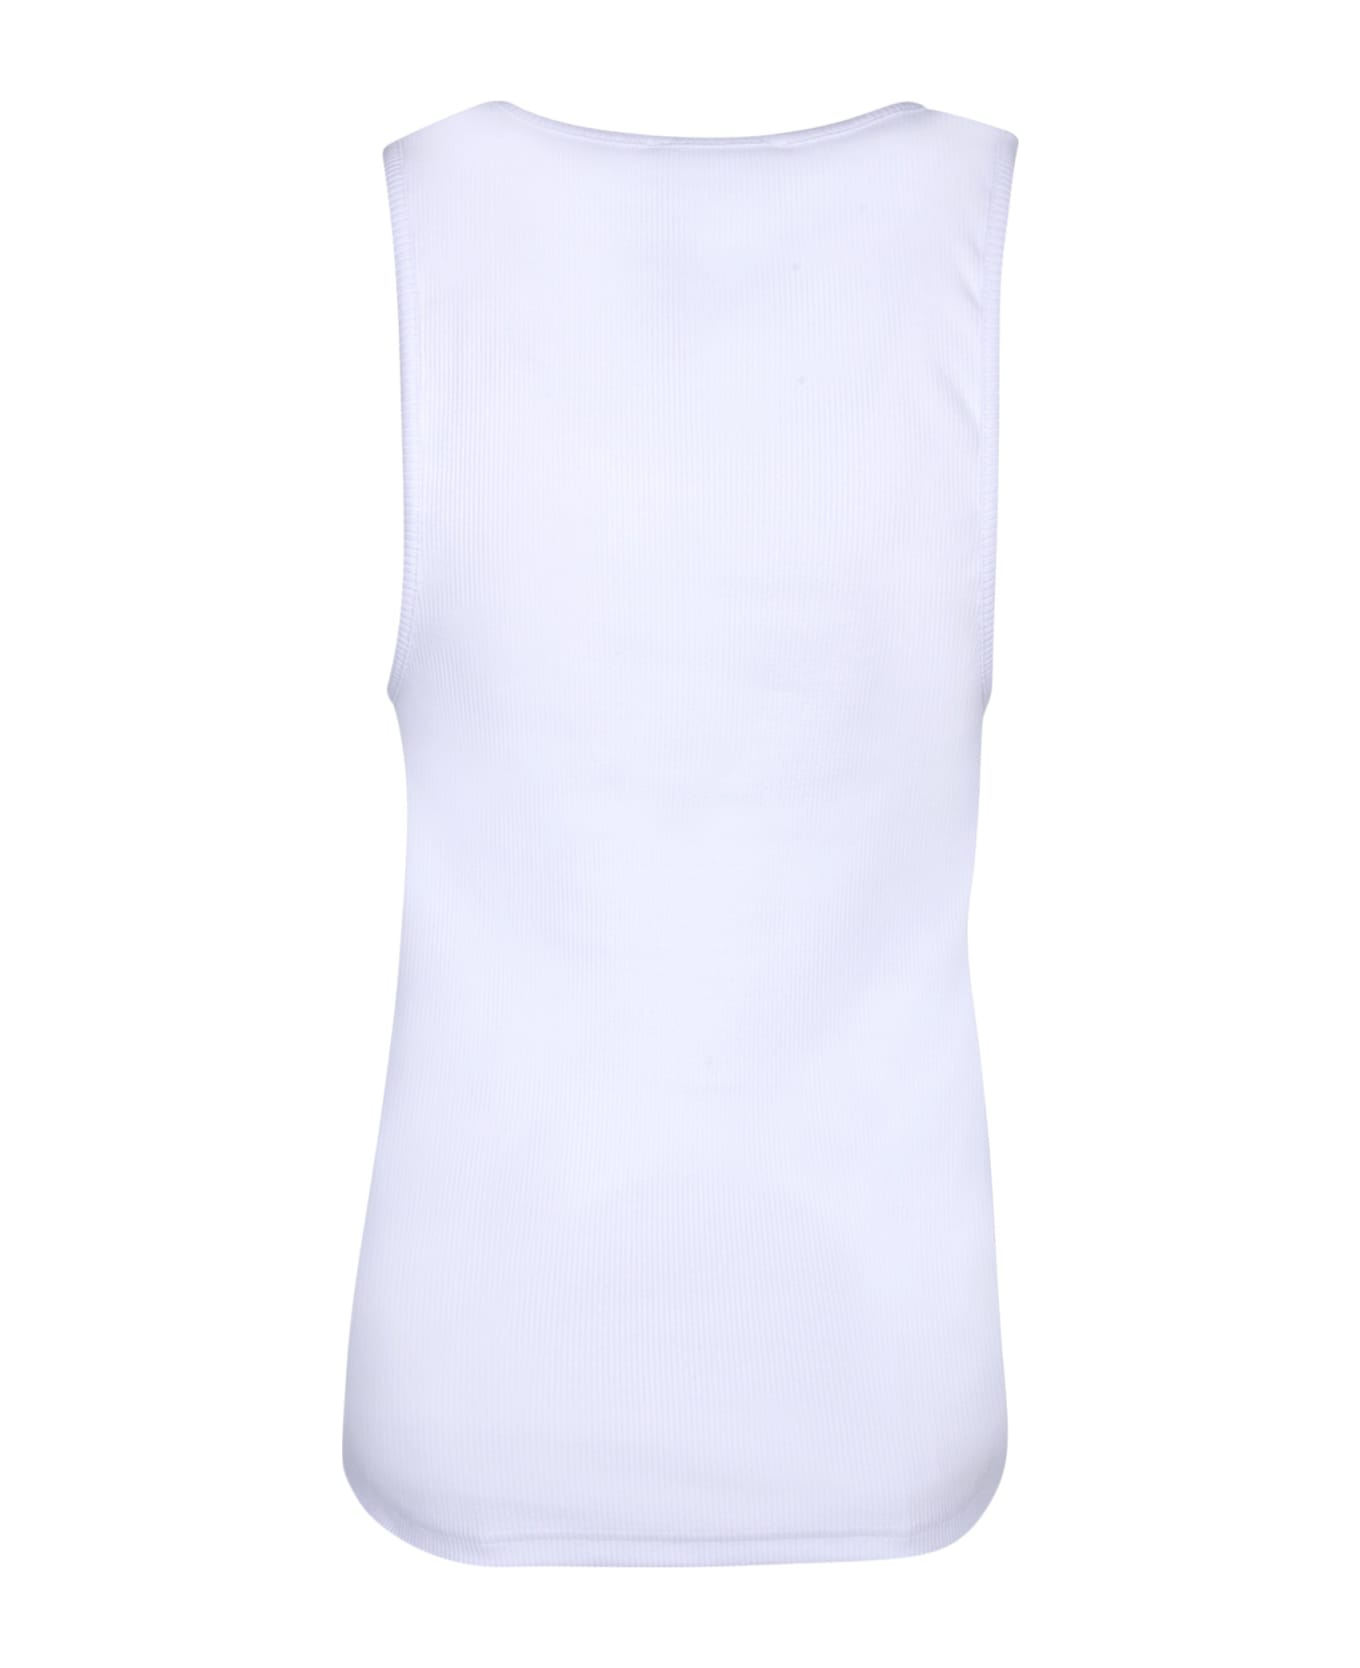 J.W. Anderson Embroidered Logo White Tank Top - White